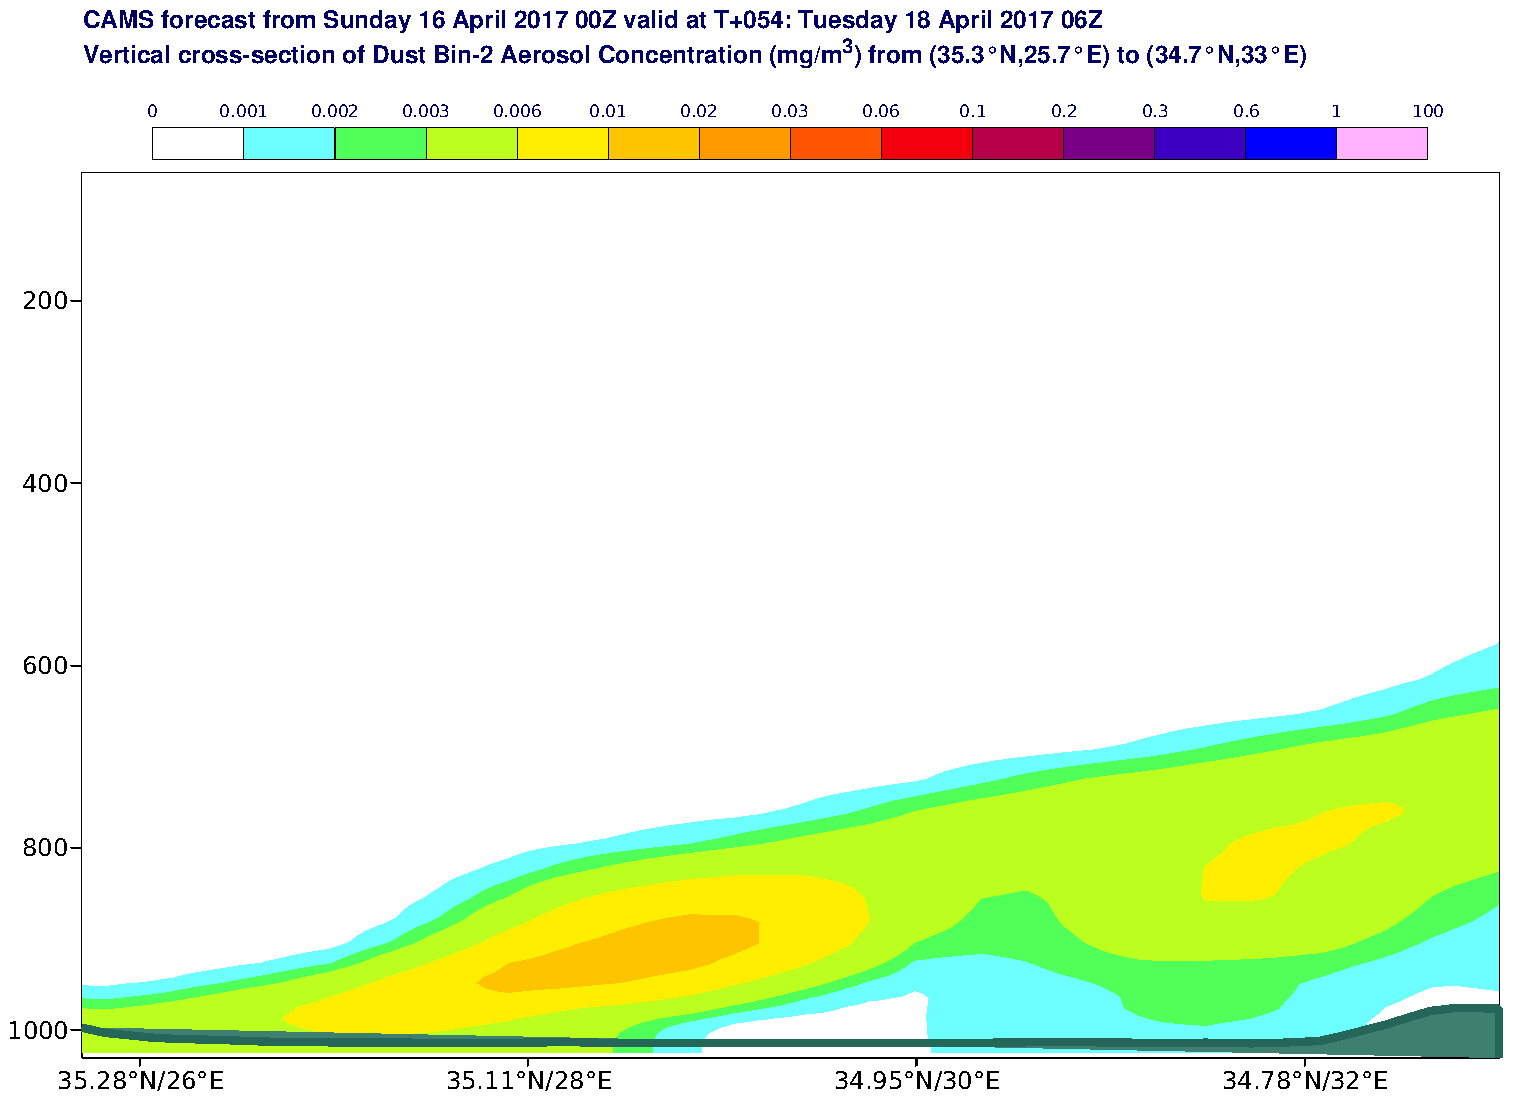 Vertical cross-section of Dust Bin-2 Aerosol Concentration (mg/m3) valid at T54 - 2017-04-18 06:00